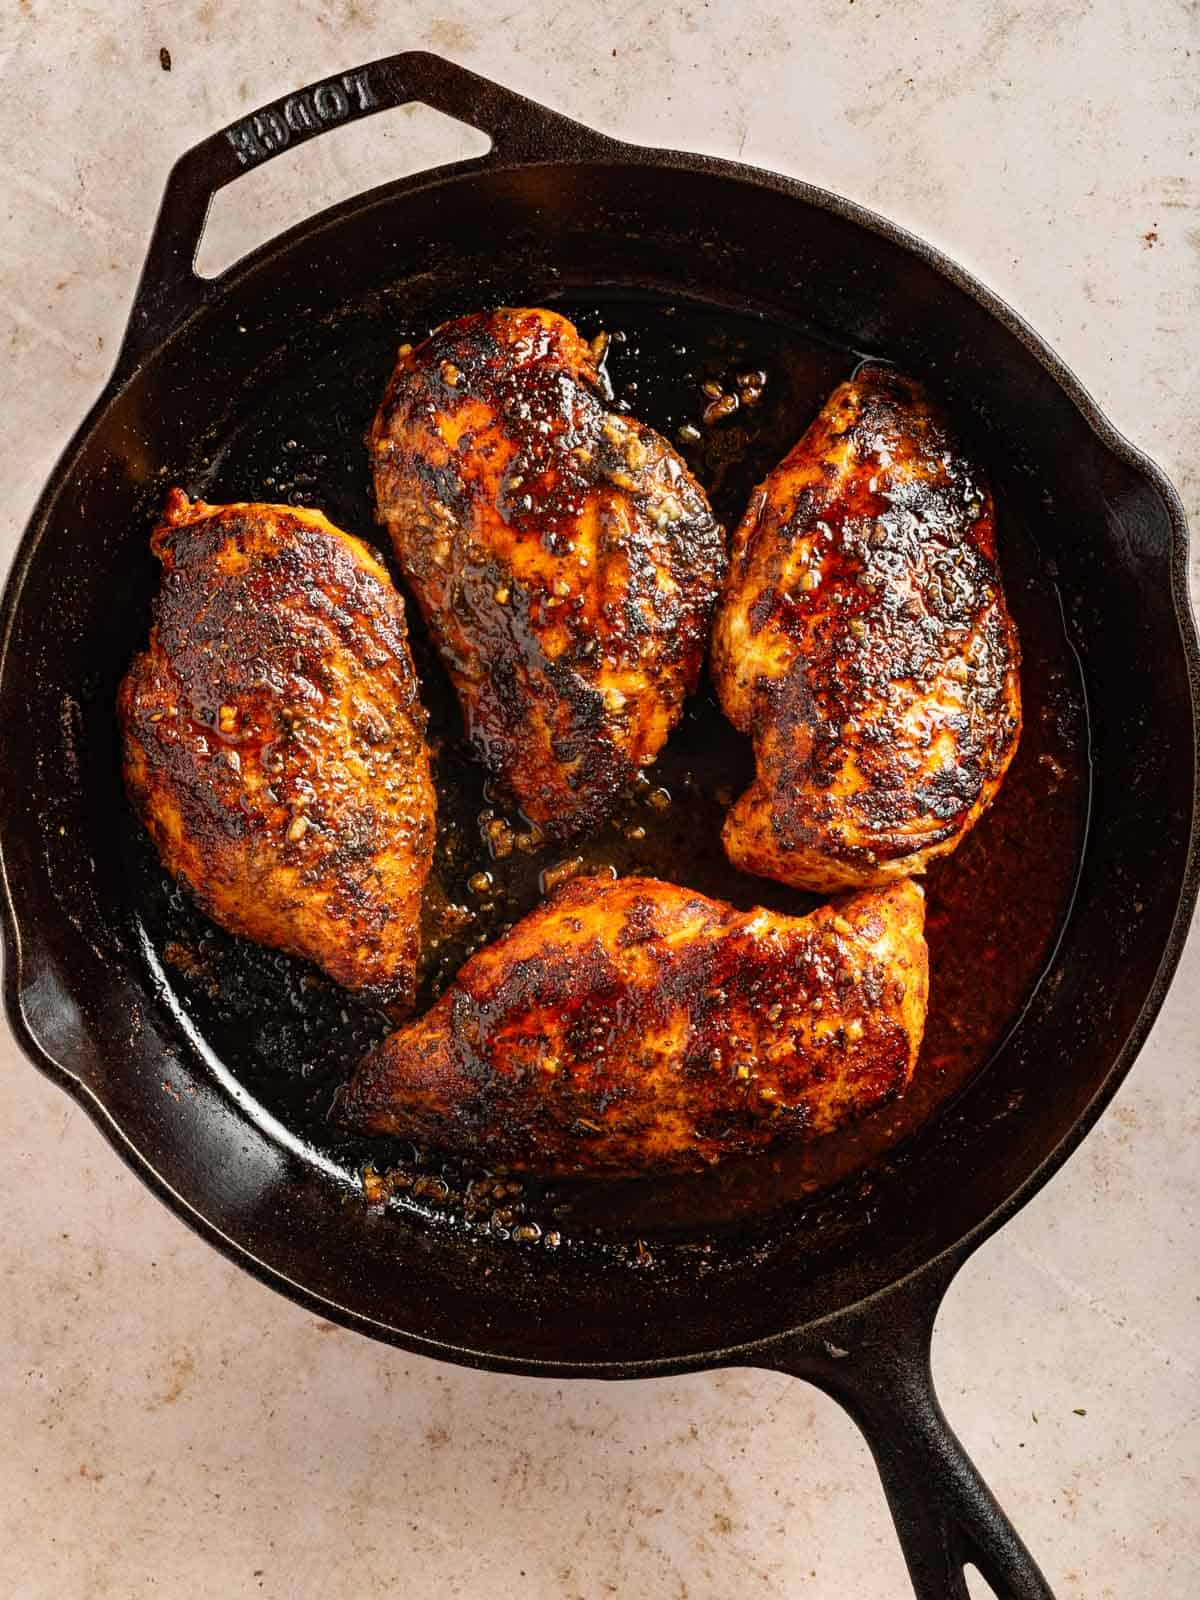 Seared blackened chicken breasts in a skillet.